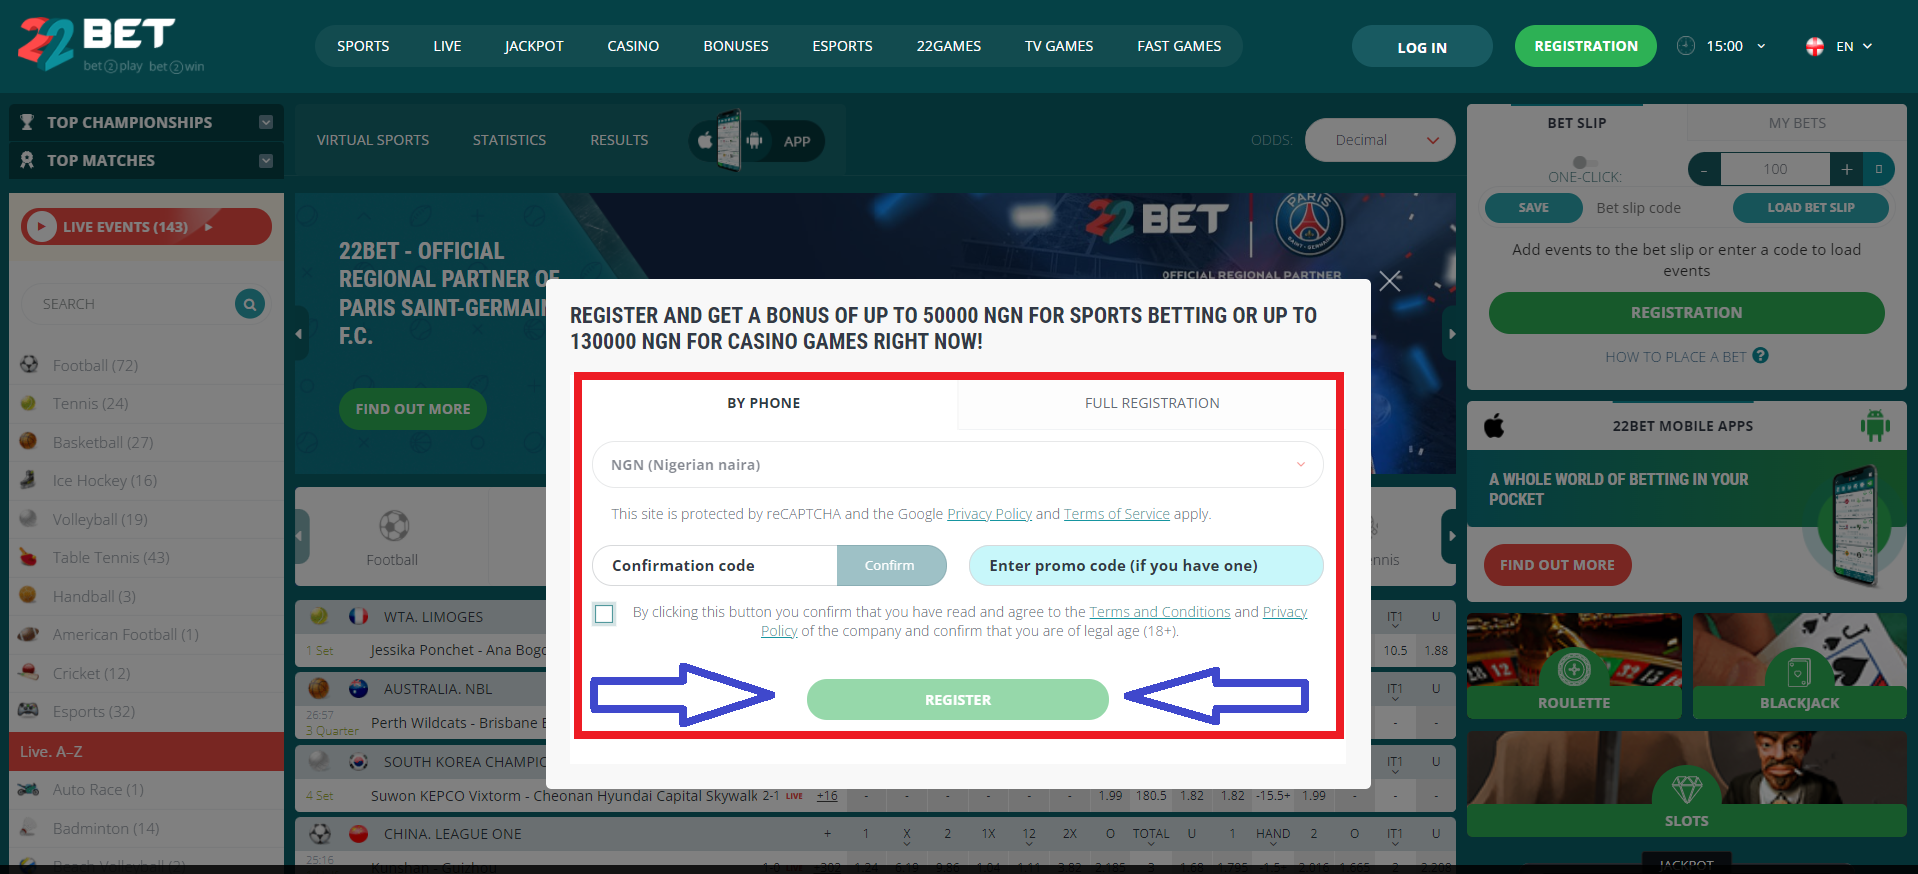 How to register and log in at 22bet betting company